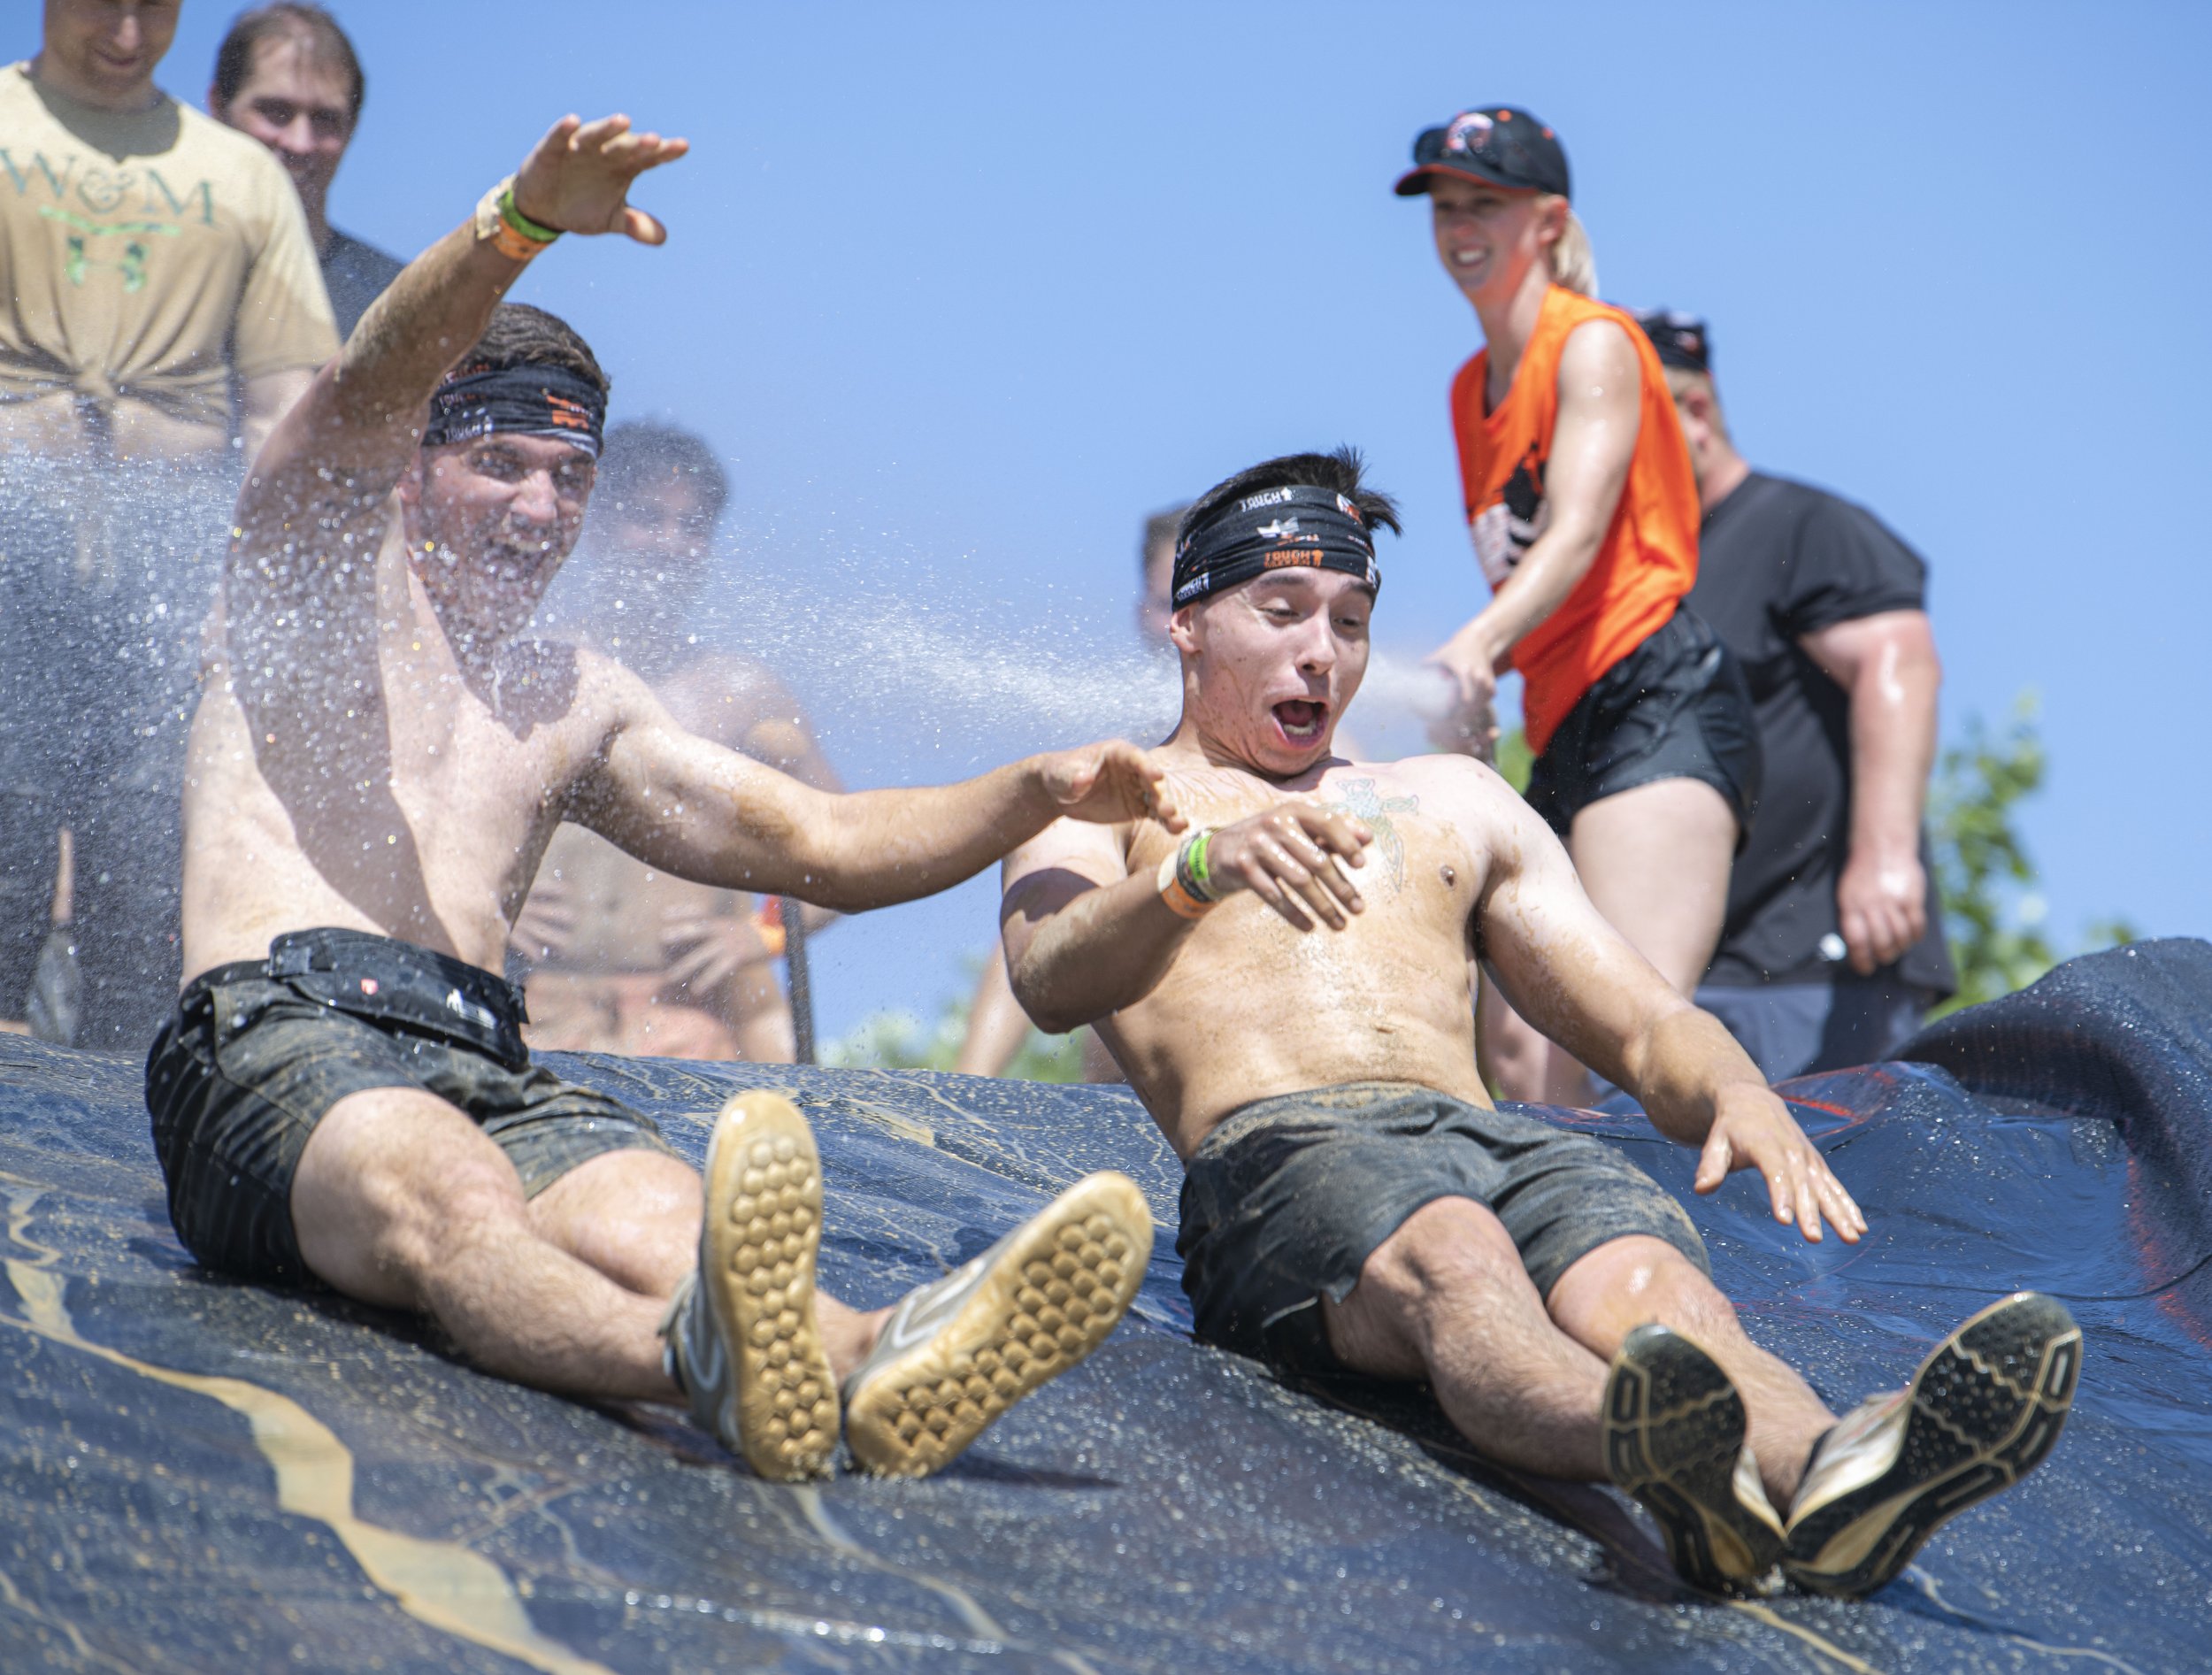  A couple of Tough Mudder Competitors make their way down the mud slide at the Tough Mudder event held in San Bernadino on April 9, 2022. (Jon Putman | The Corsair) 